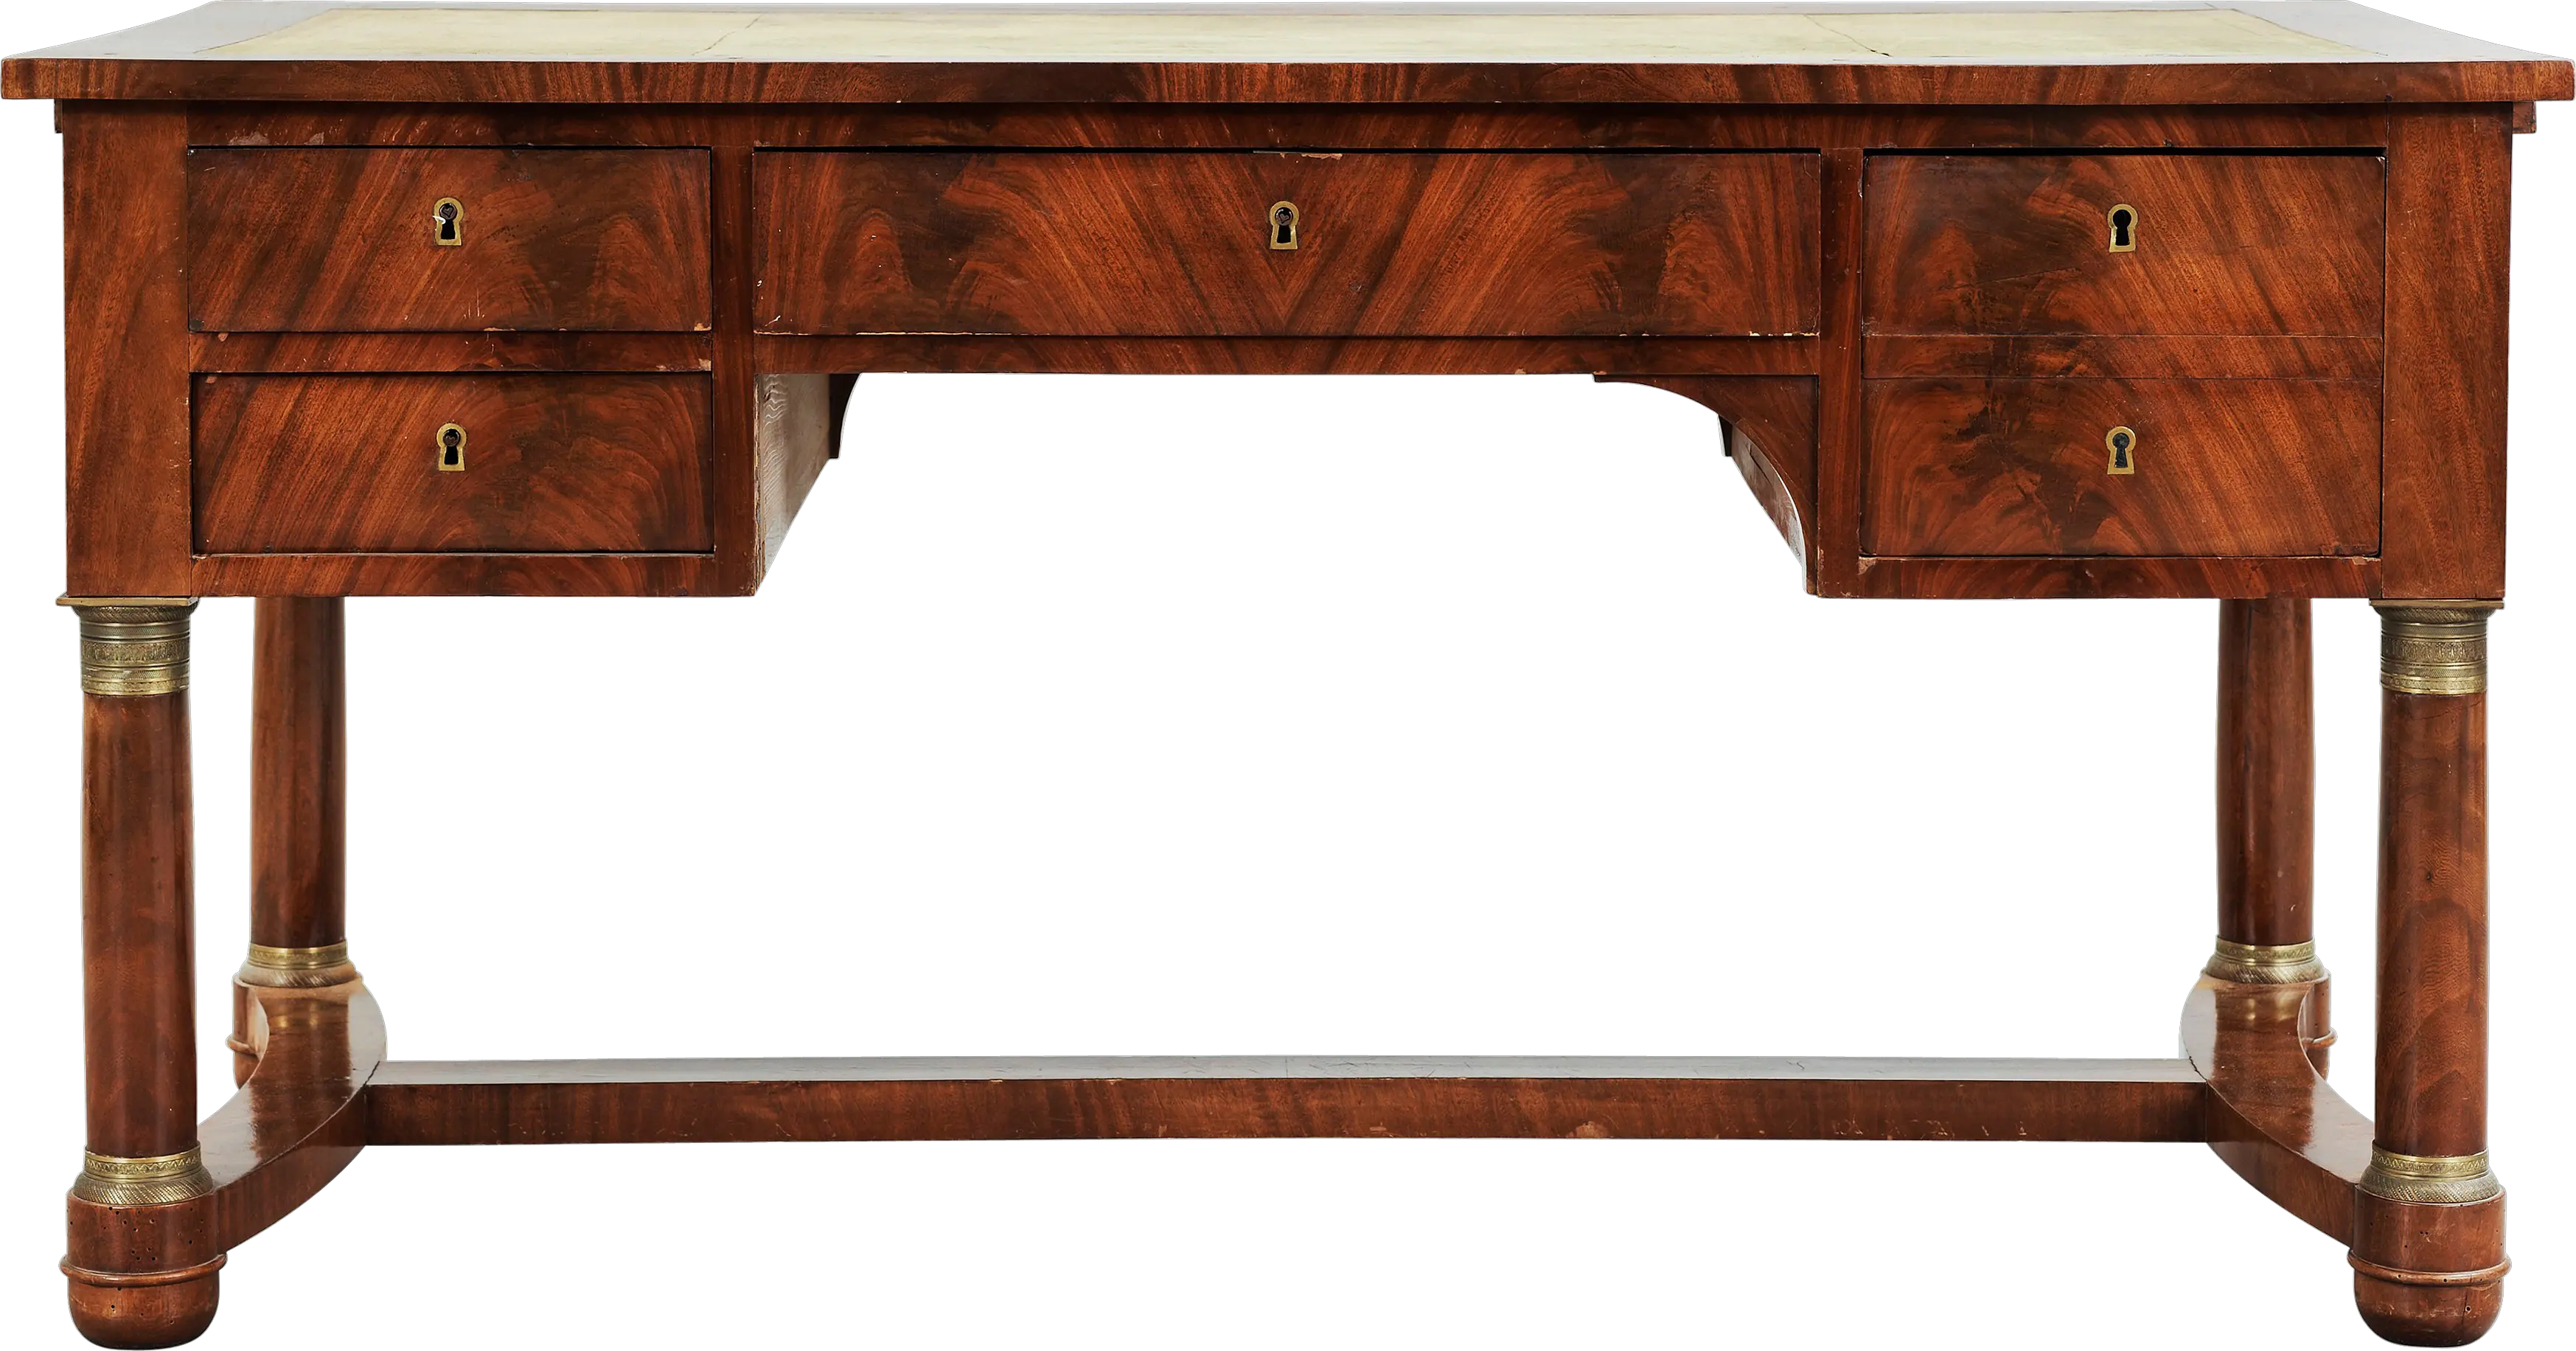 Png Image For Free Table Images In Png Desk Transparent Background